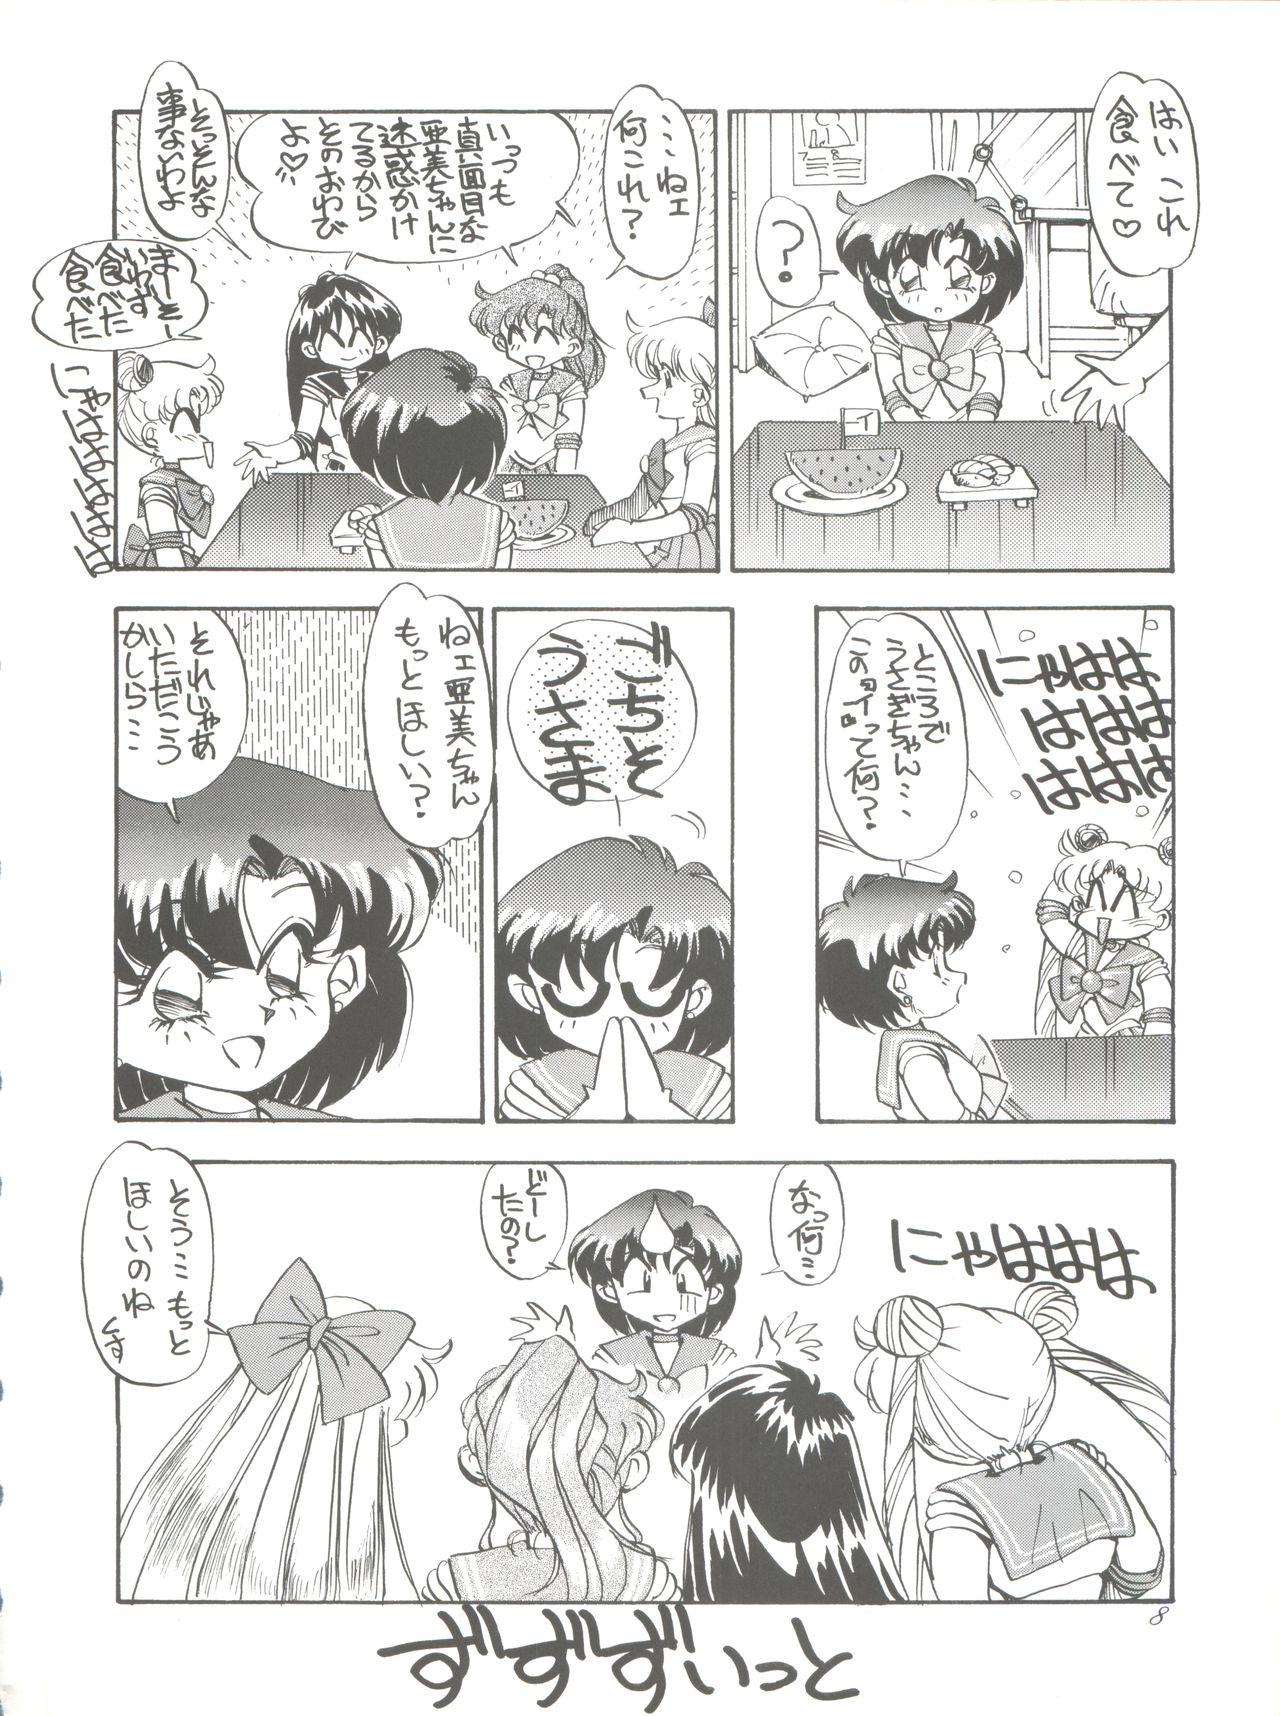 Lovers PUSSY-CAT Special 9 Mada Yaru Sailor Moon R - Sailor moon Pack - Page 7